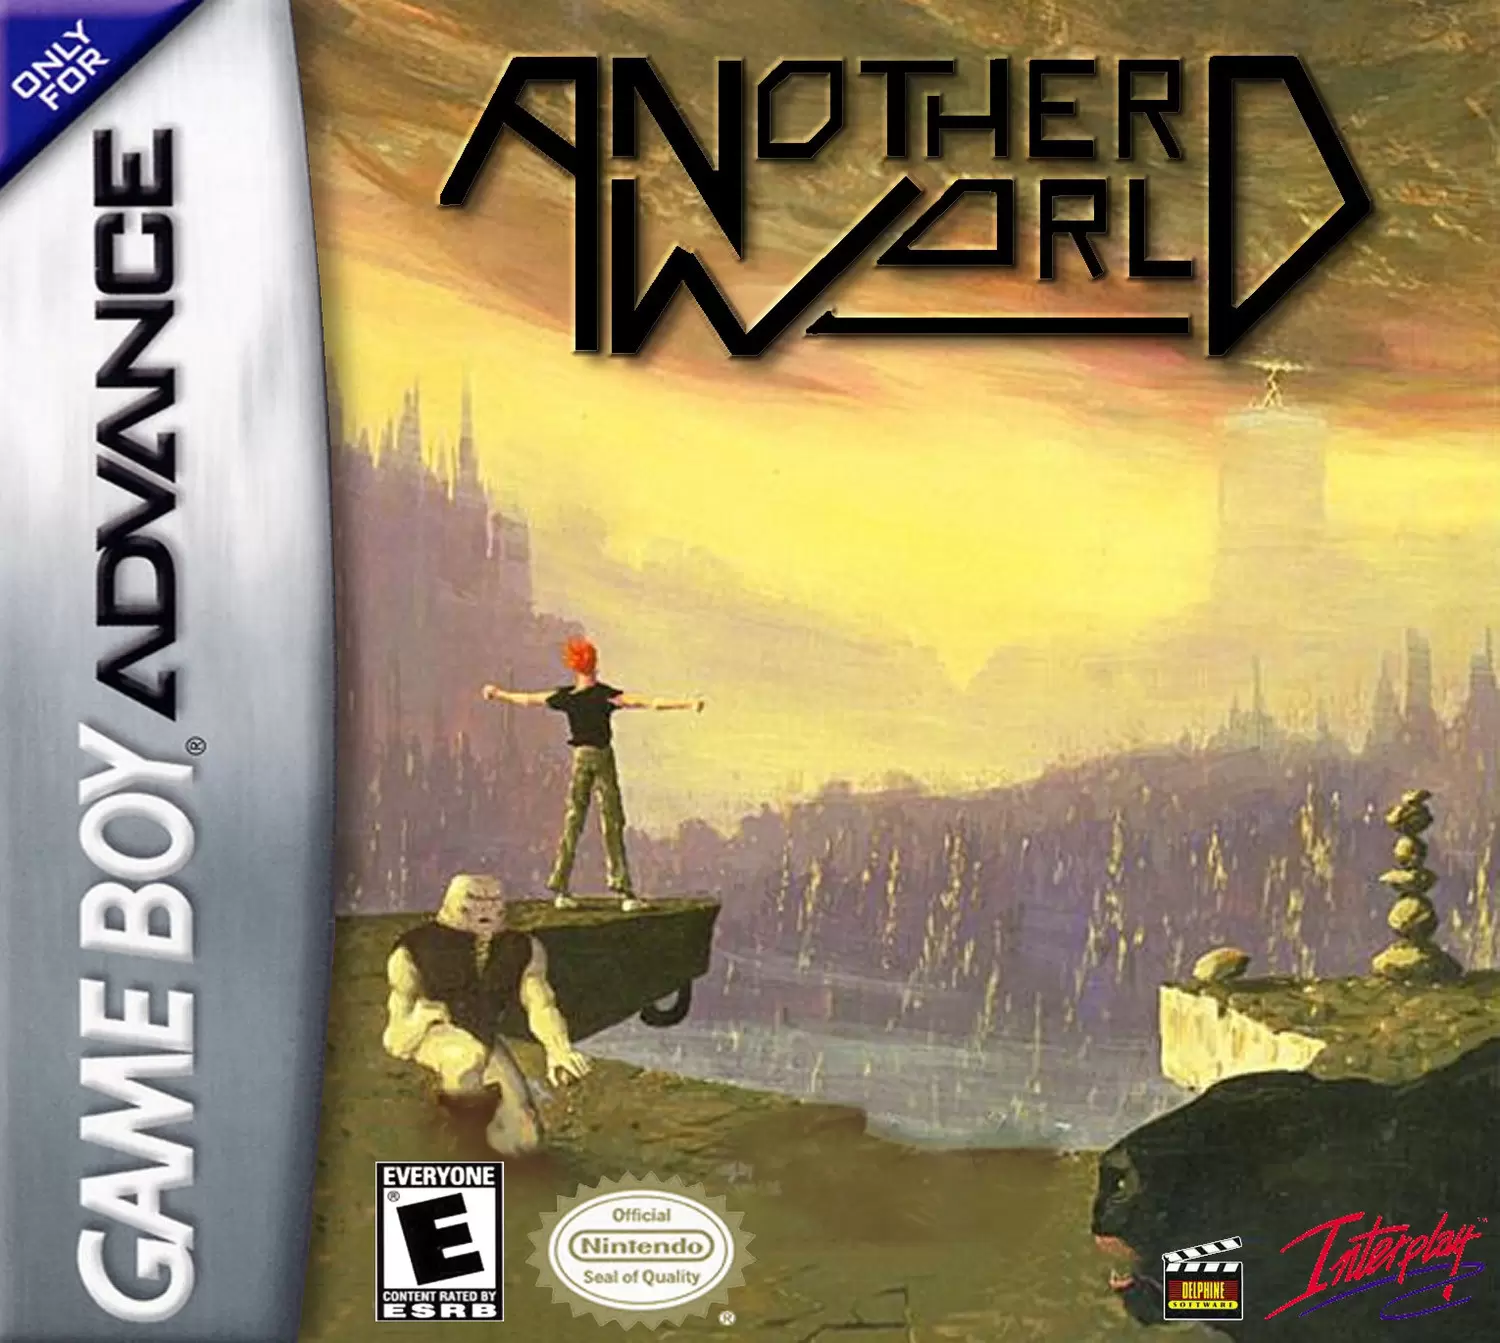 Game Boy Advance Games - Another World